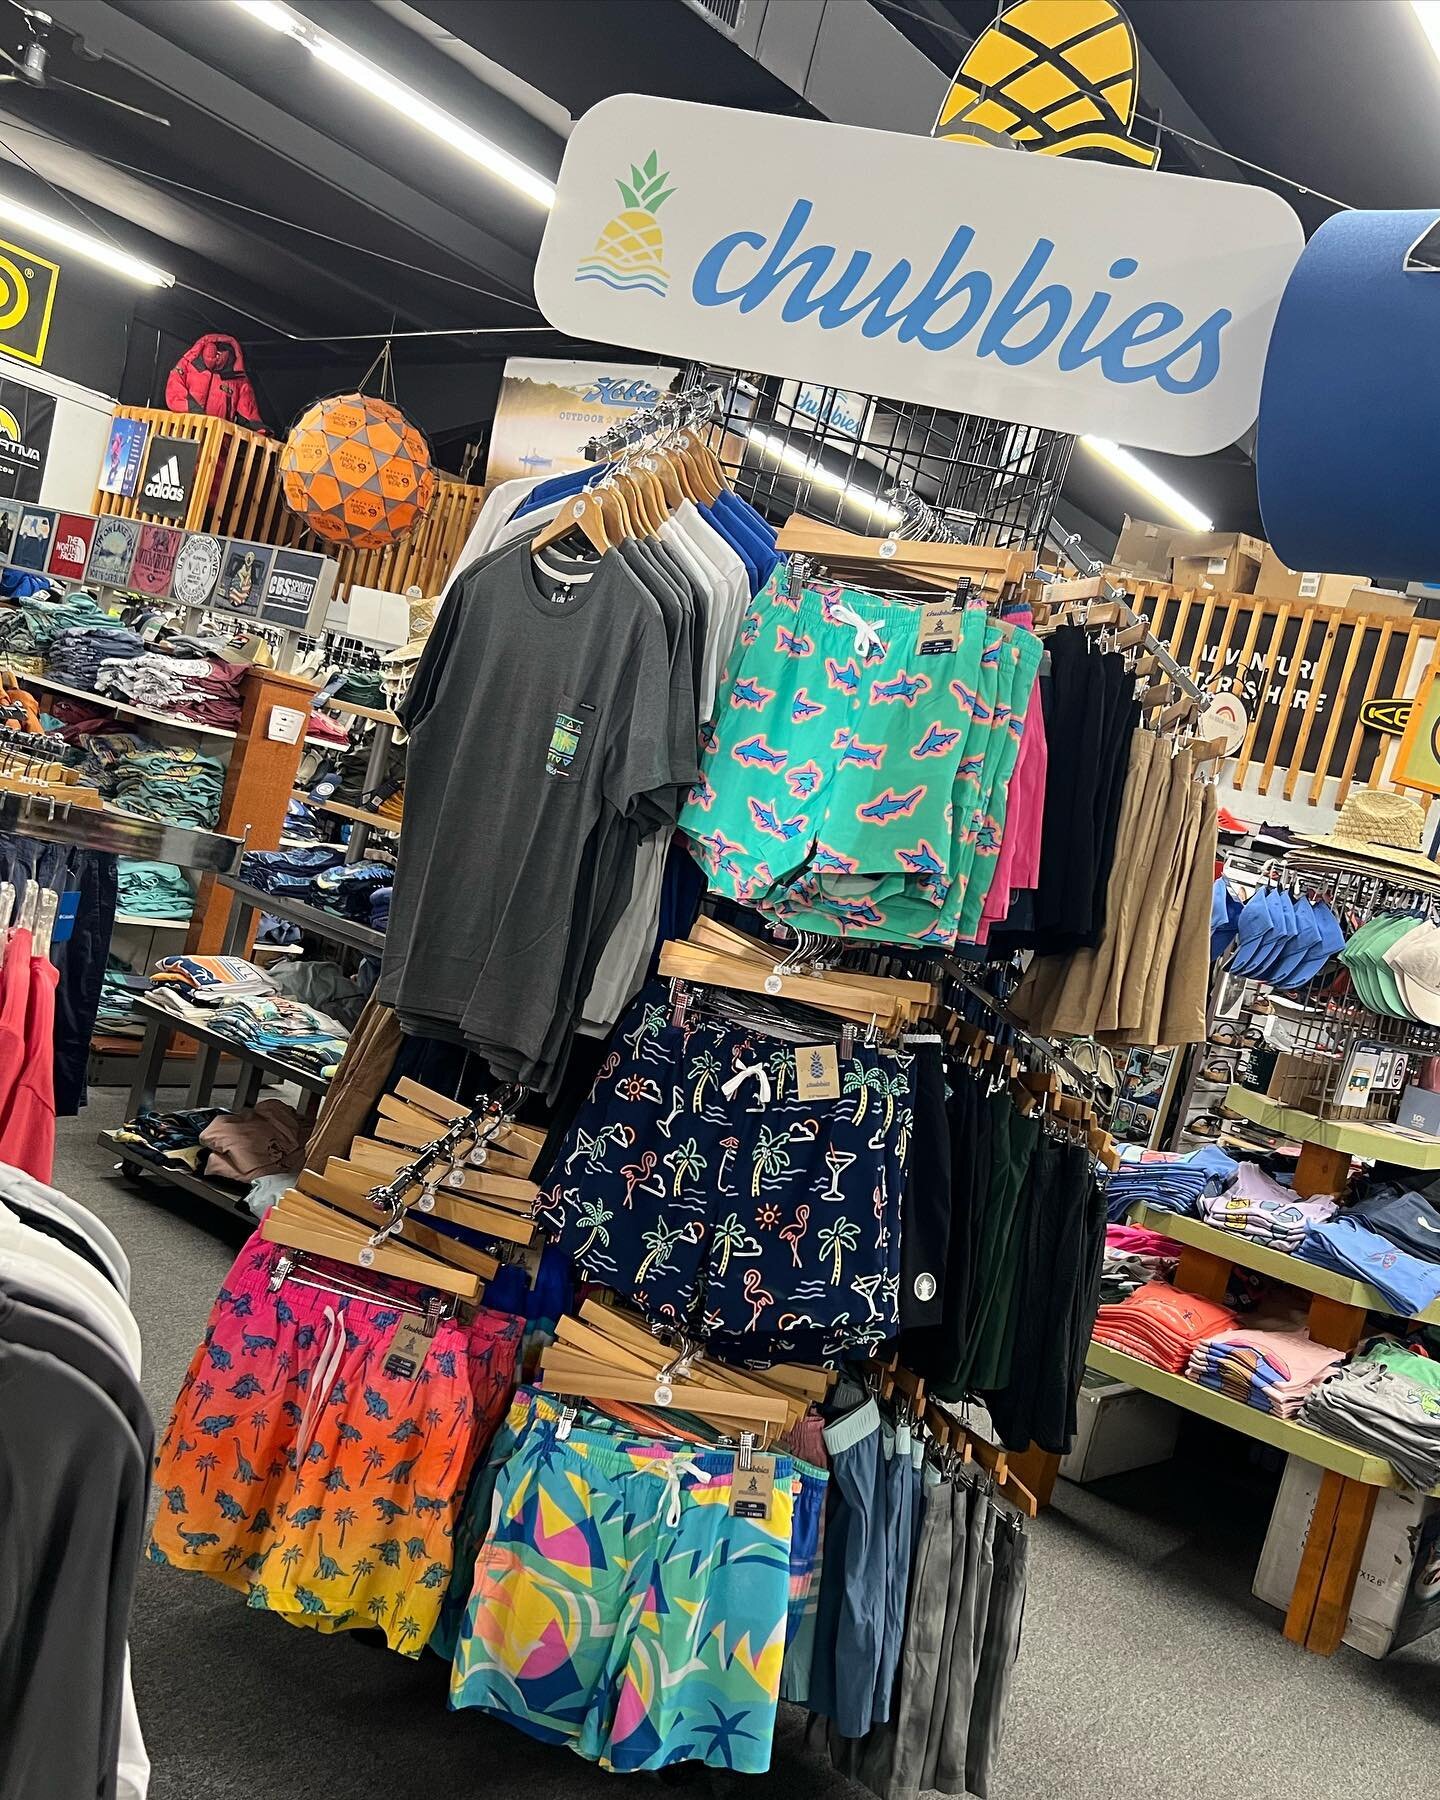 The Chubbies Tower. Only at CBS Sports.